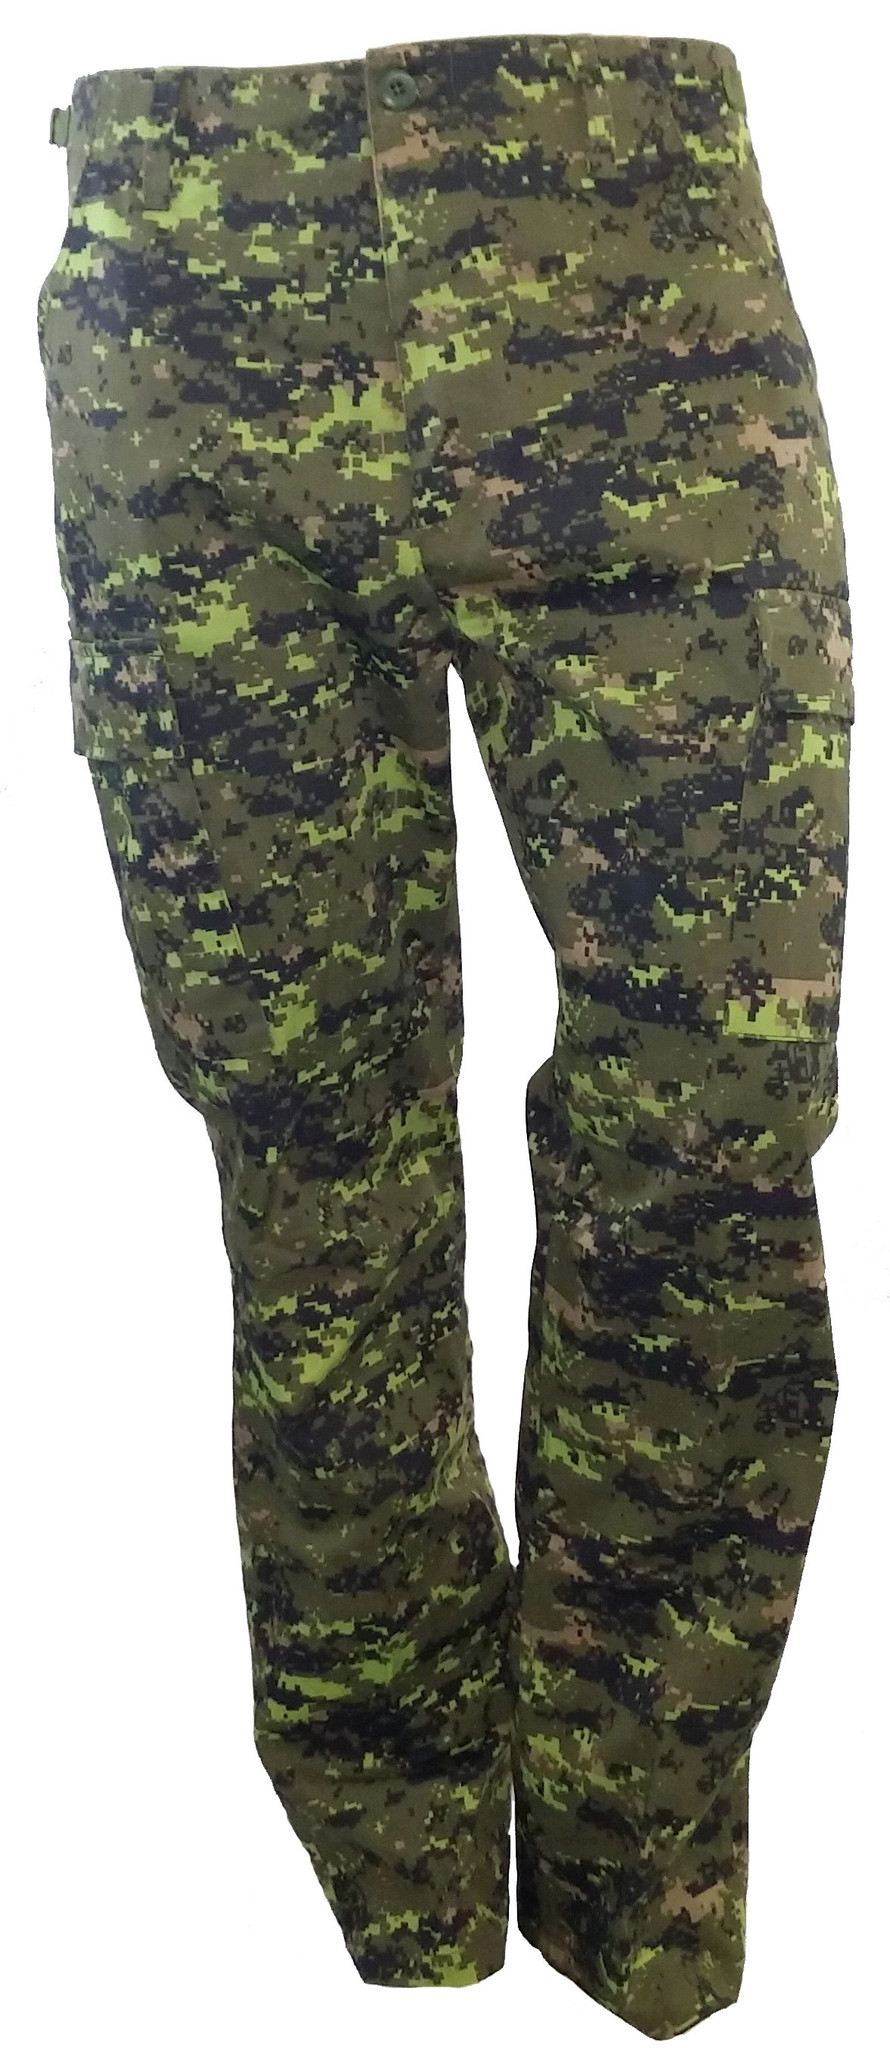 Buy BACKBONE Mens Fashion Bright Camouflage Cargo Pants Military Combat Style  BDU Pants online | Topofstyle